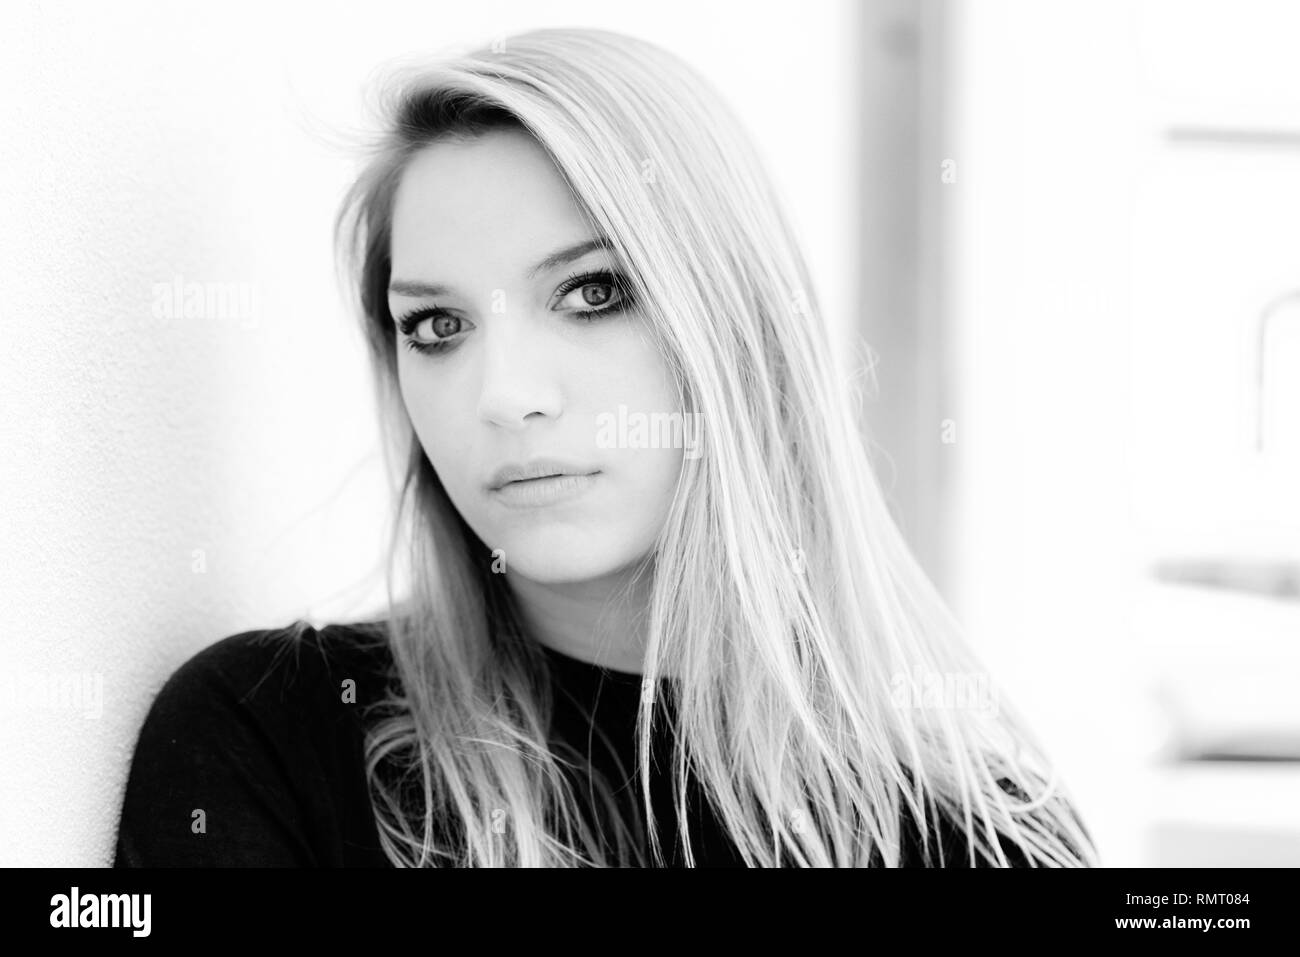 Greyscale portrait of a gorgeous young woman with long blond hair looking thoughtfully at the camera with a quiet calm expression Stock Photo